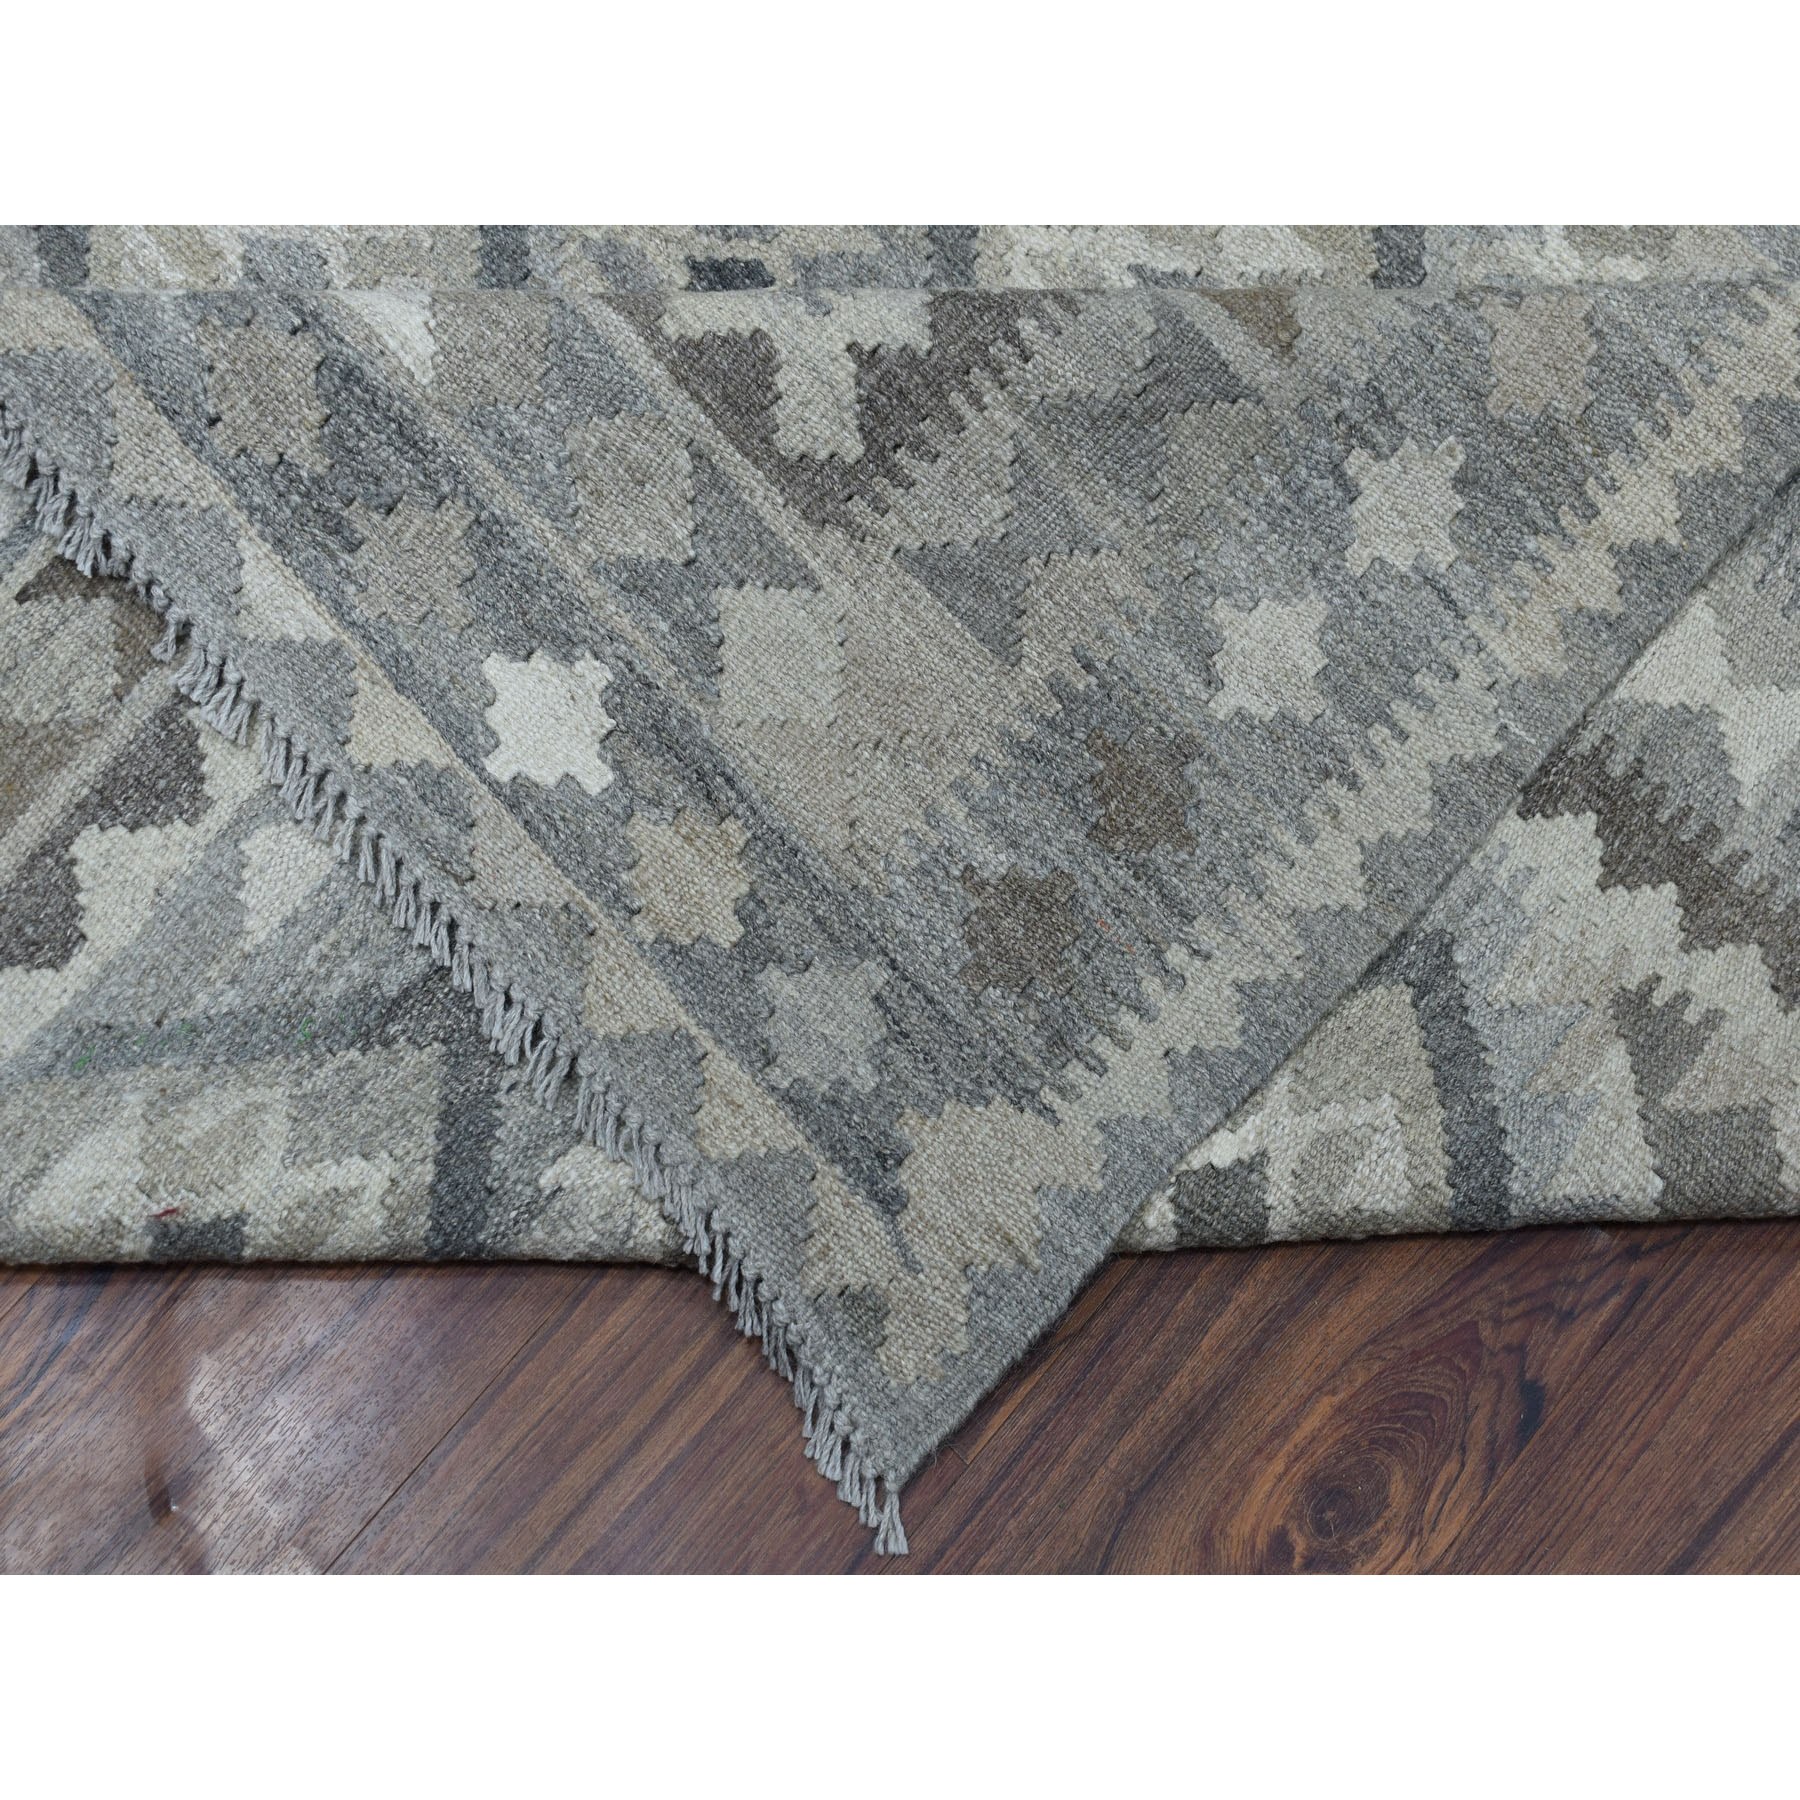 8-4 x10- Undyed Natural Wool Afghan Kilim Reversible Hand Woven Oriental Rug 